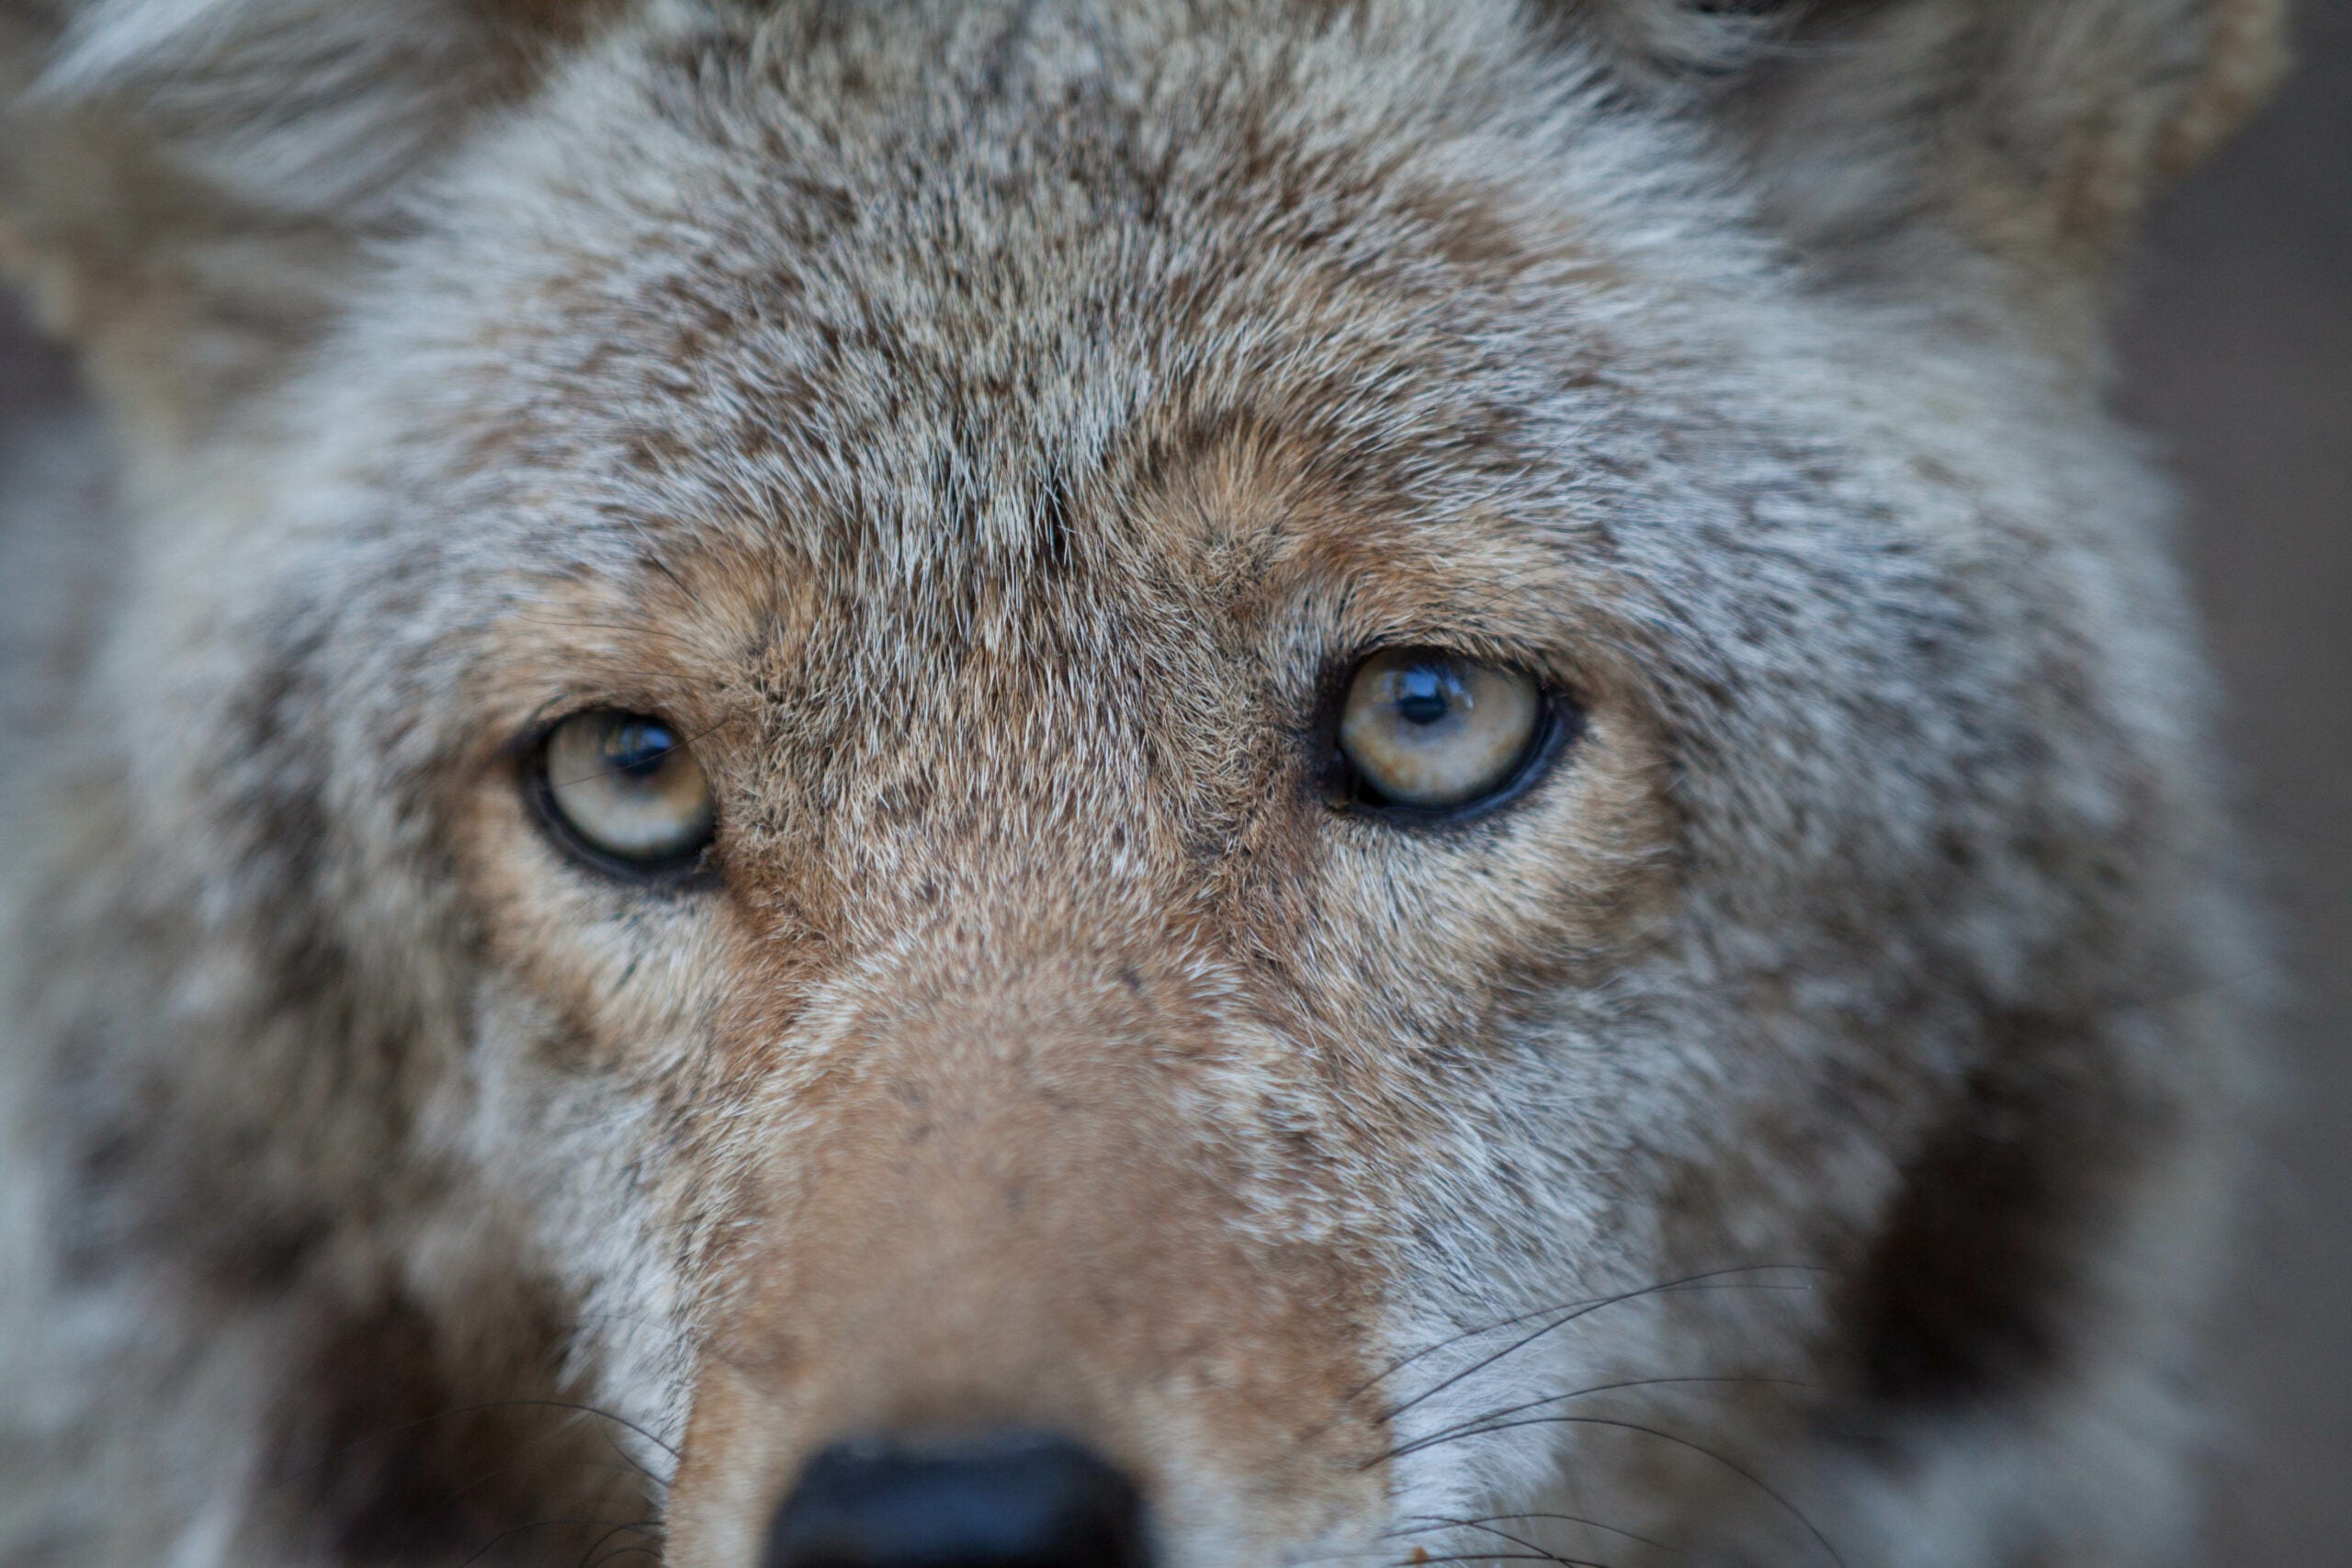 A close-up of a coyote's eyes.